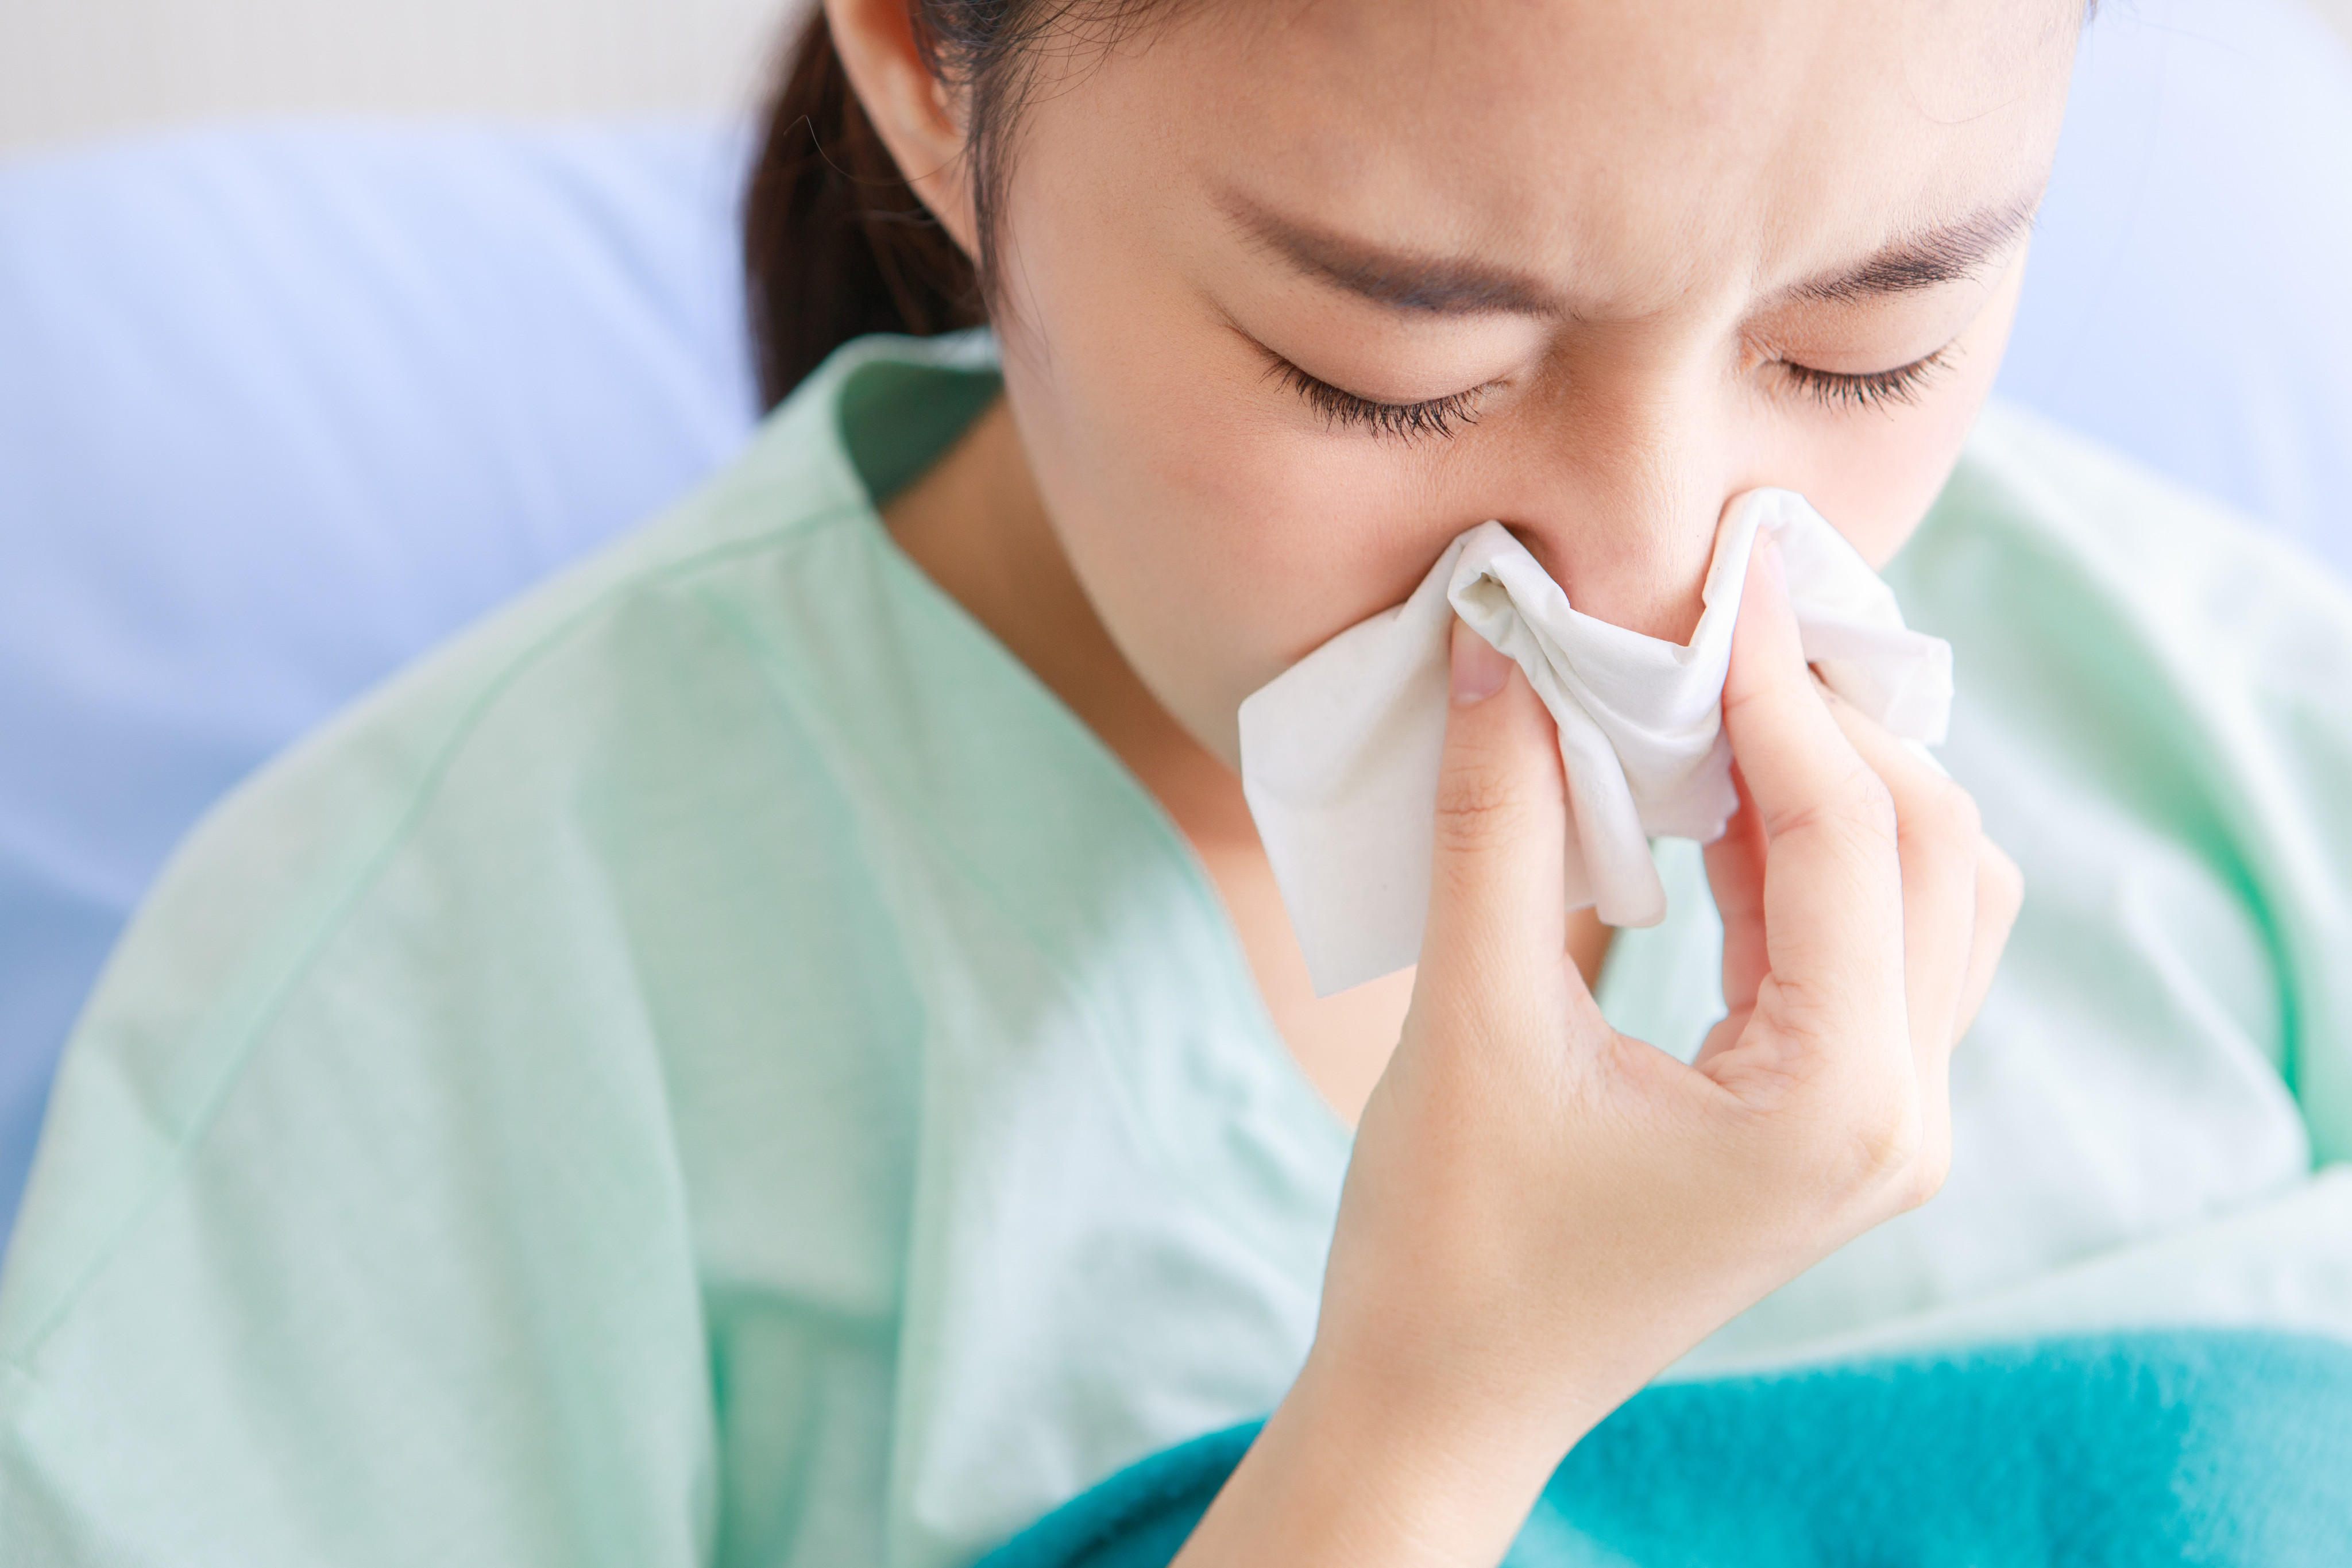 The winter flu season is expected to start in February, later than usual, an expert has said. Photo: Shutterstock